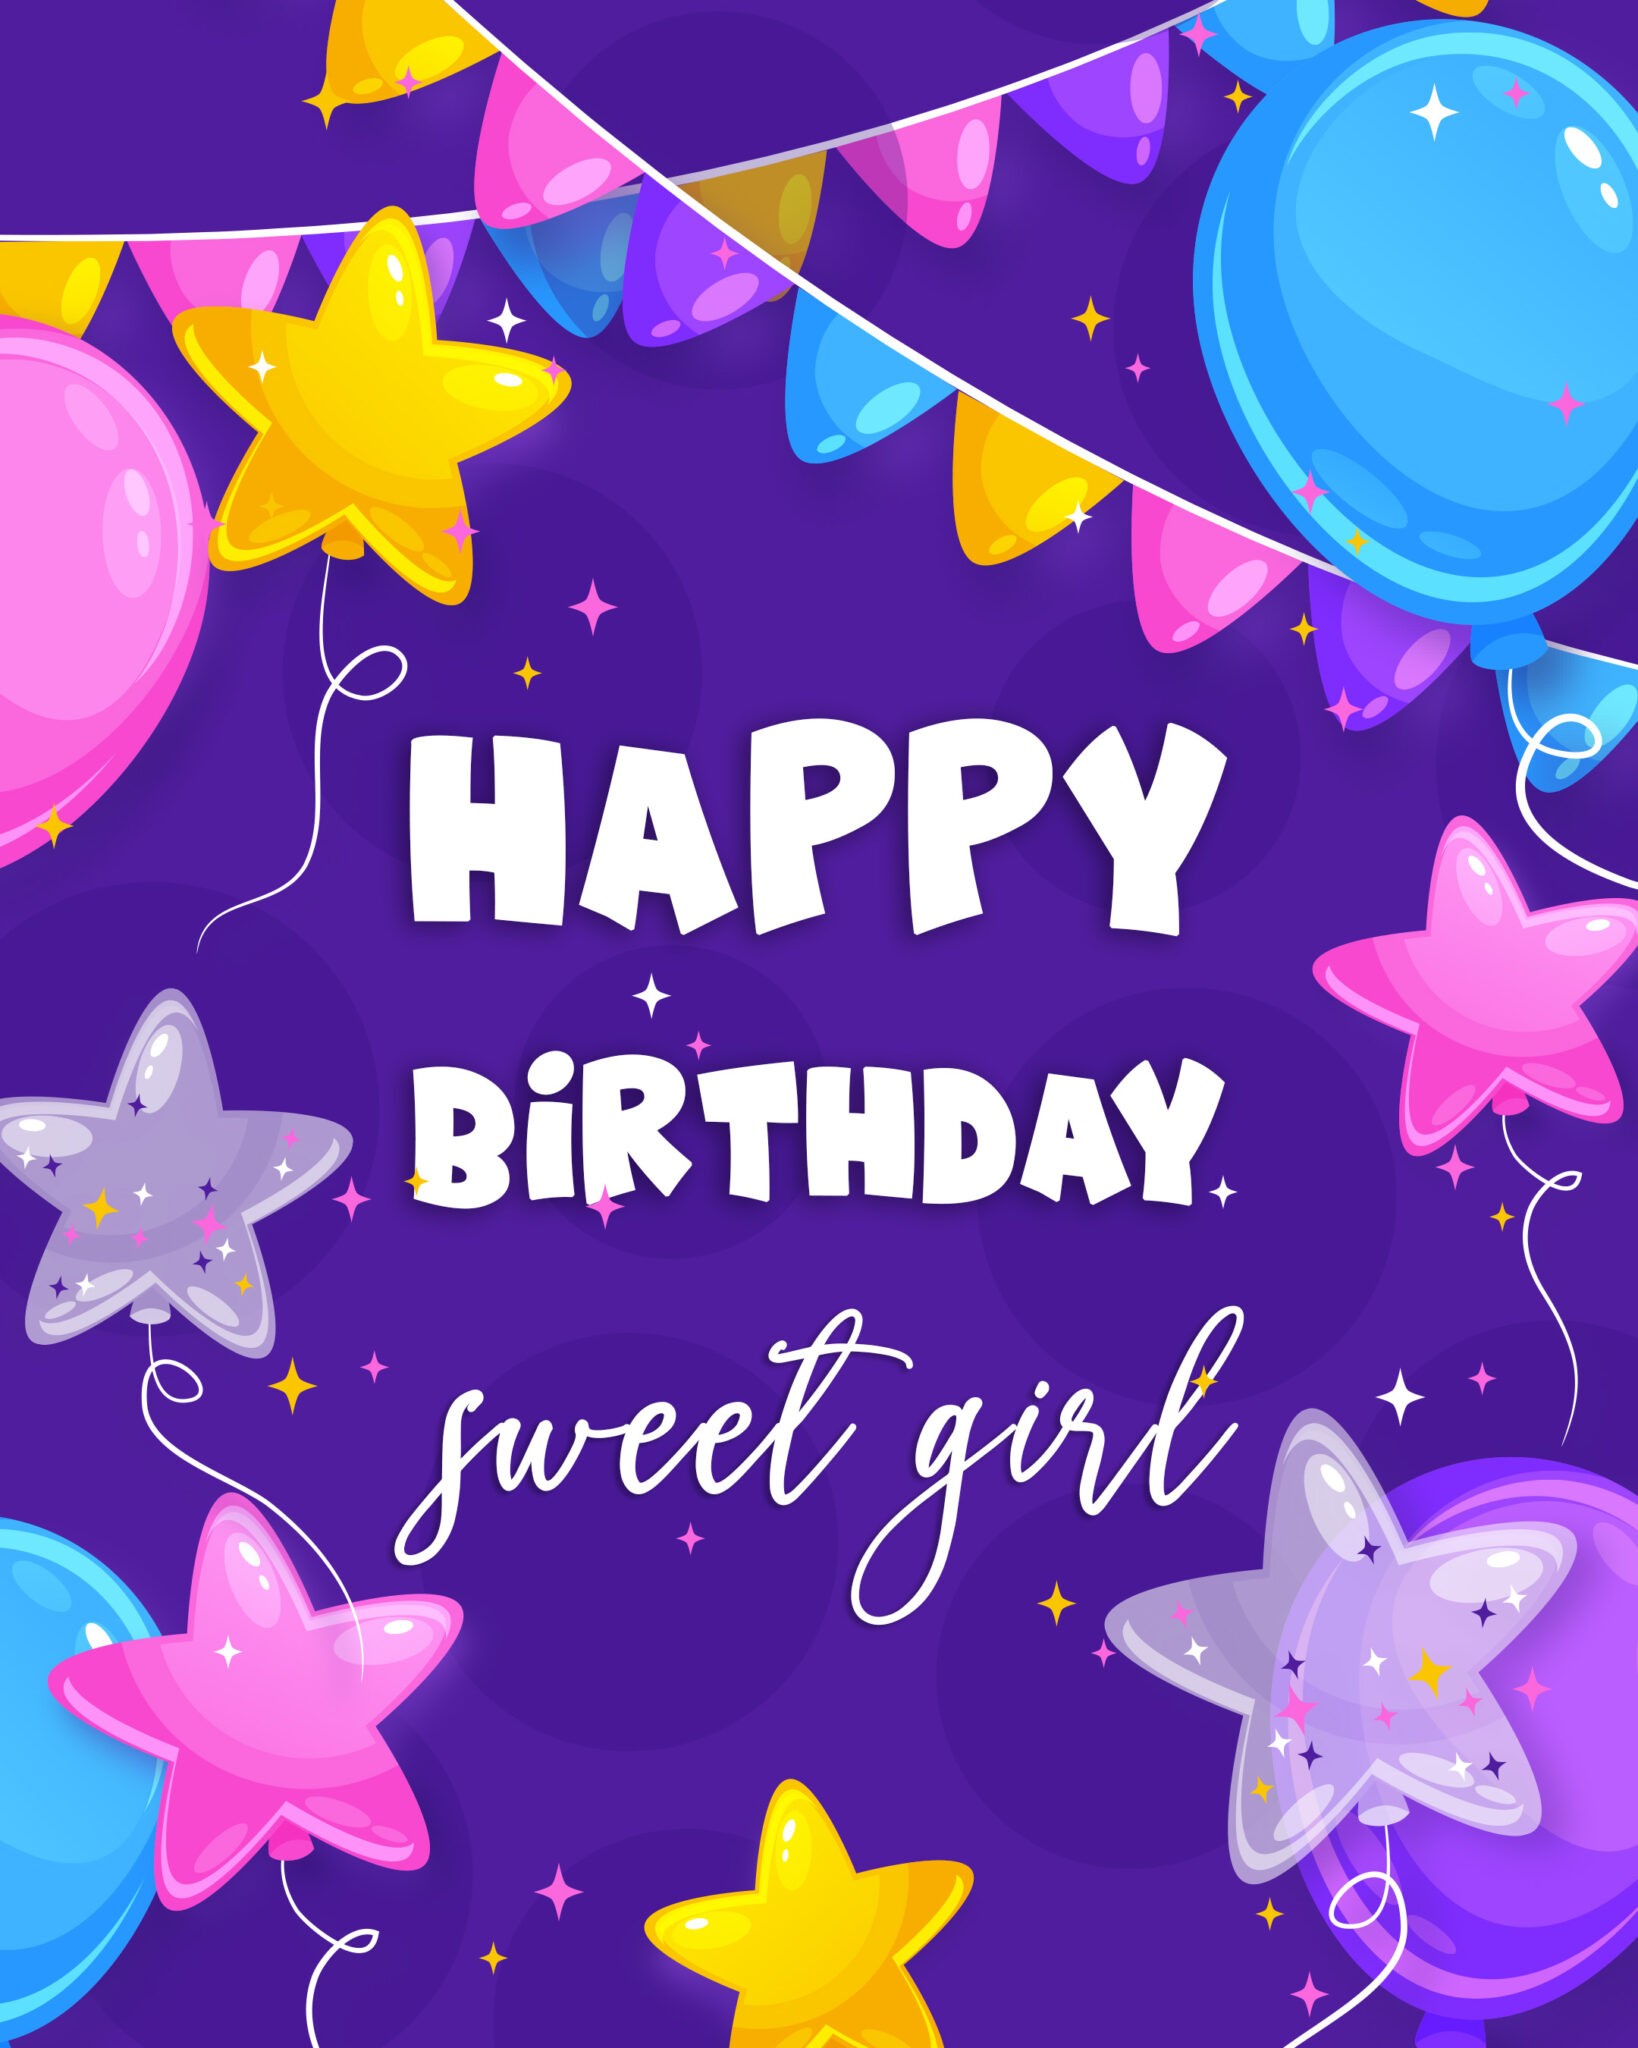 Free Happy Birthday Image For Girl With Balloons